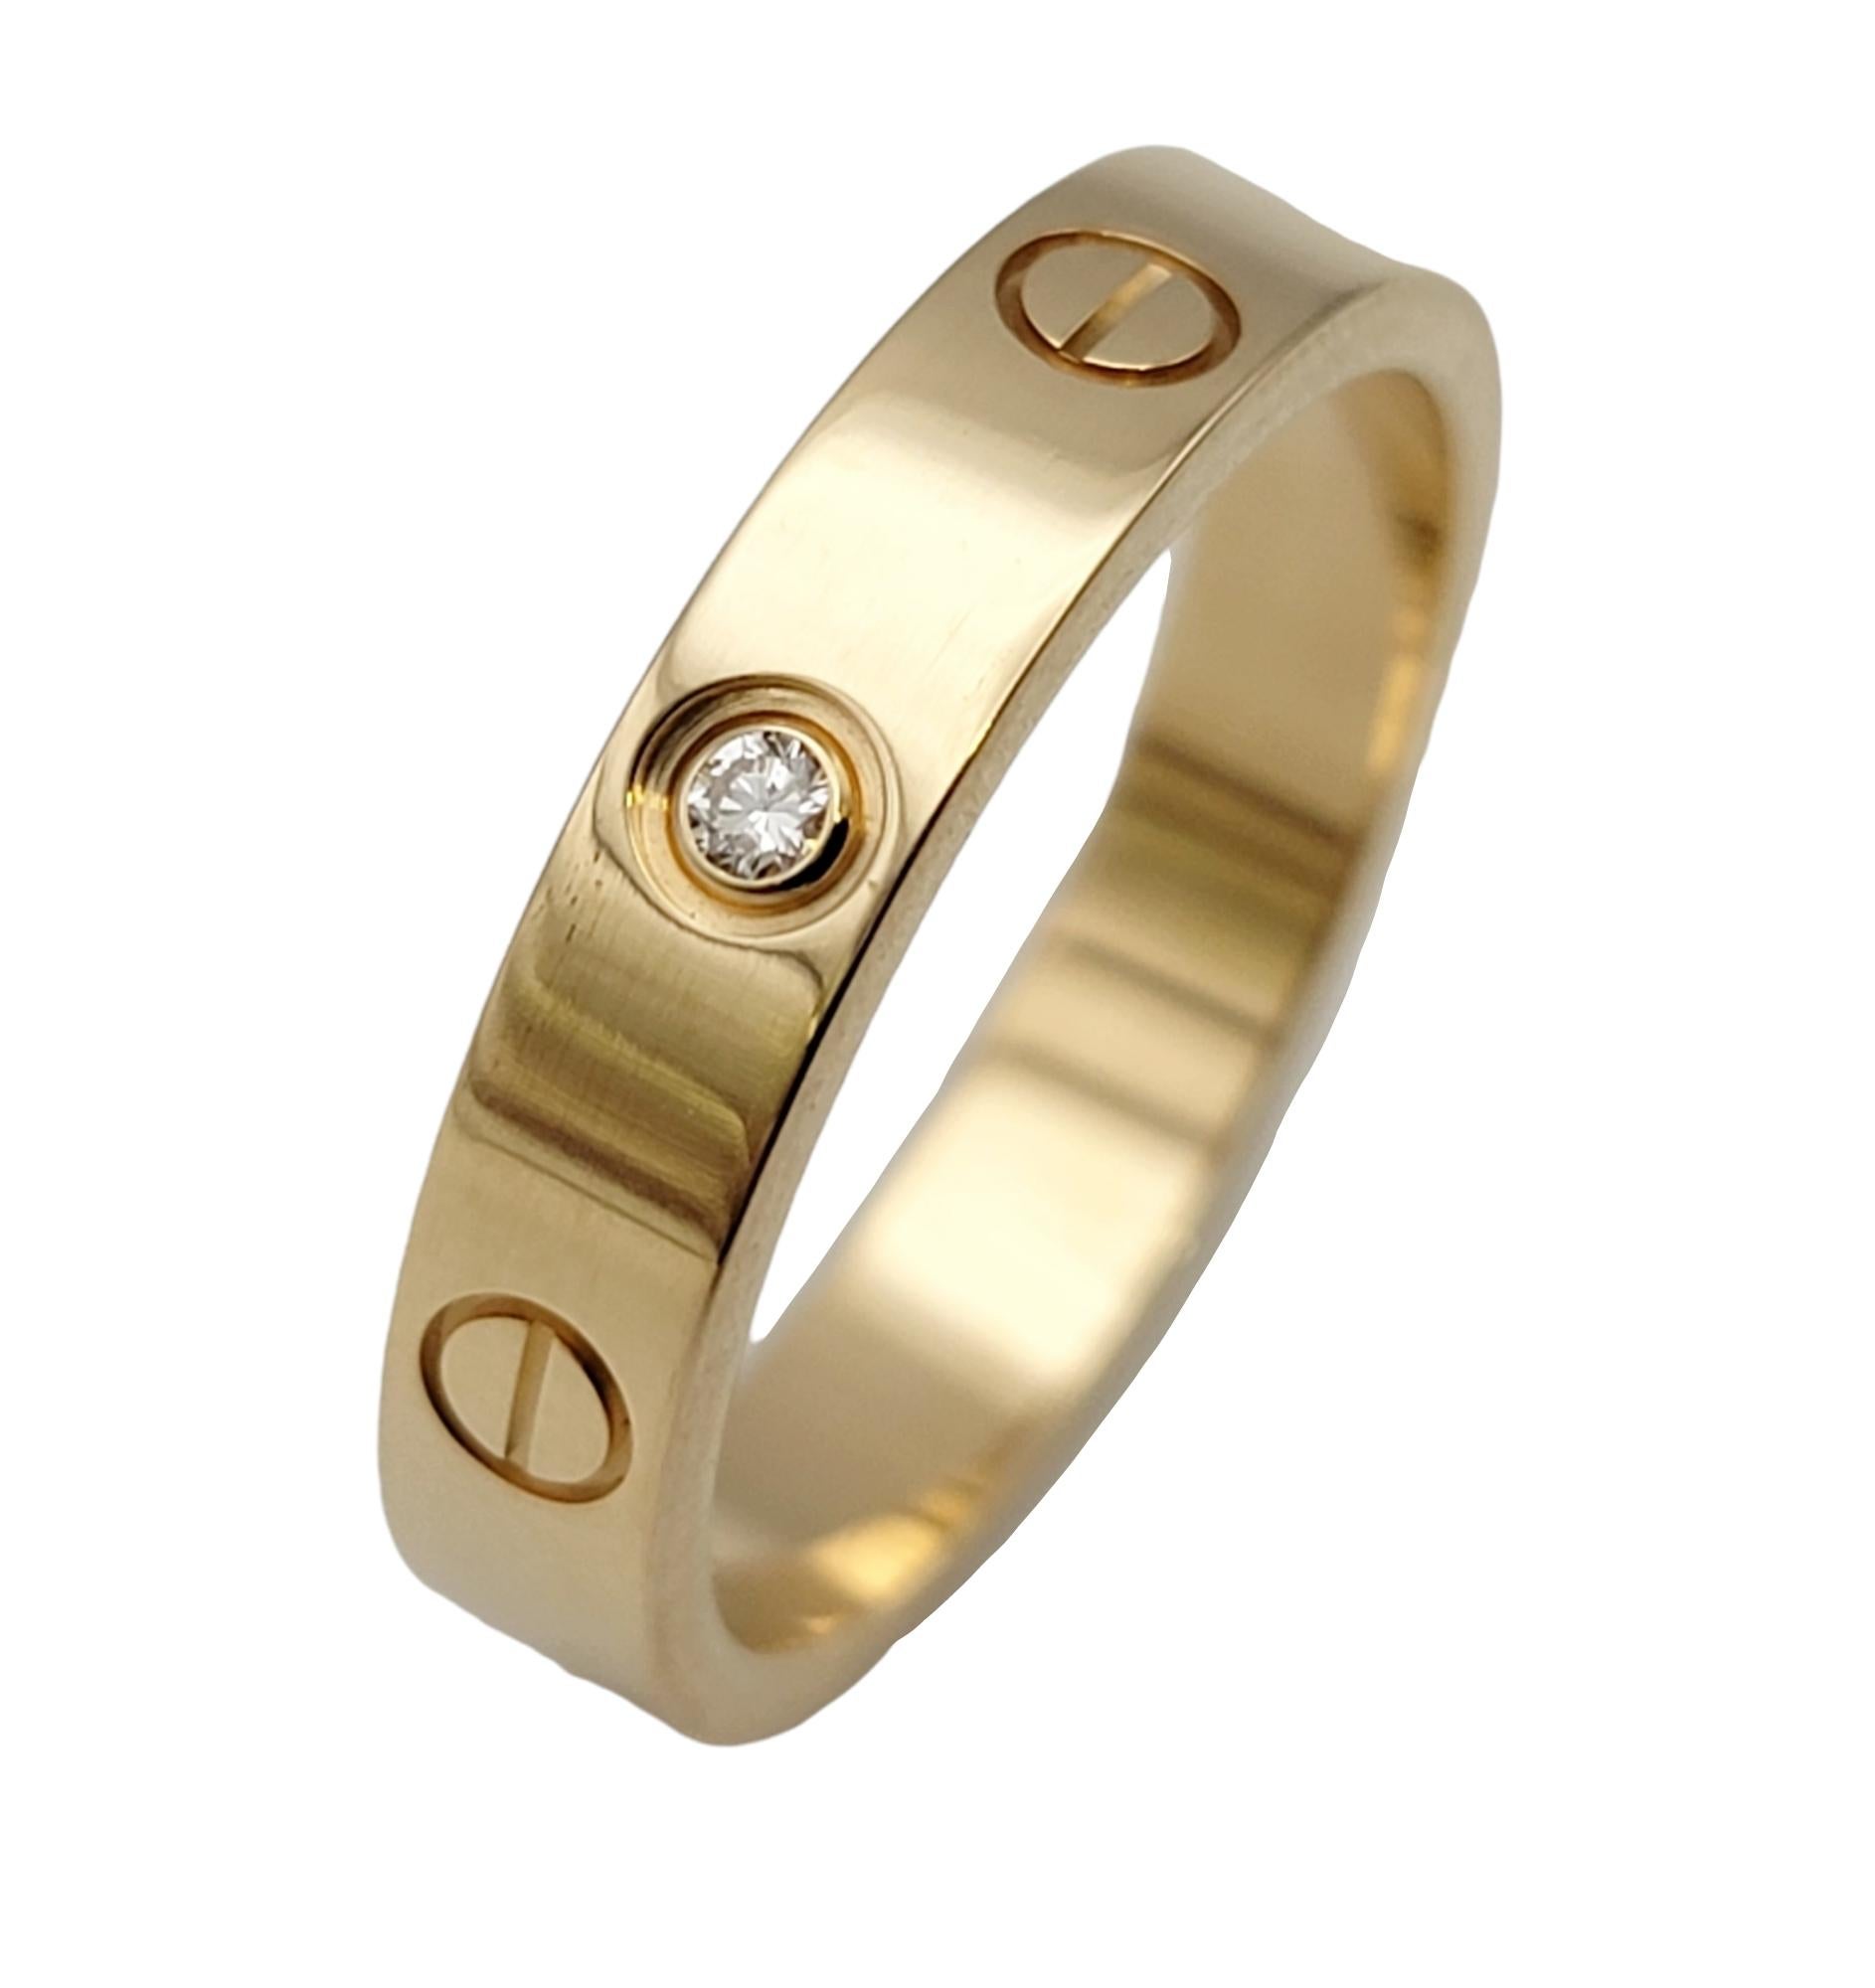 Ring size: 7.25

Iconic Love Collection 18 karat polished yellow gold band ring from luxury jeweler, Cartier. This simple, yet timeless piece makes a chic statement on the finger with its clean lines, perfect symmetry, and flawless elegance. The